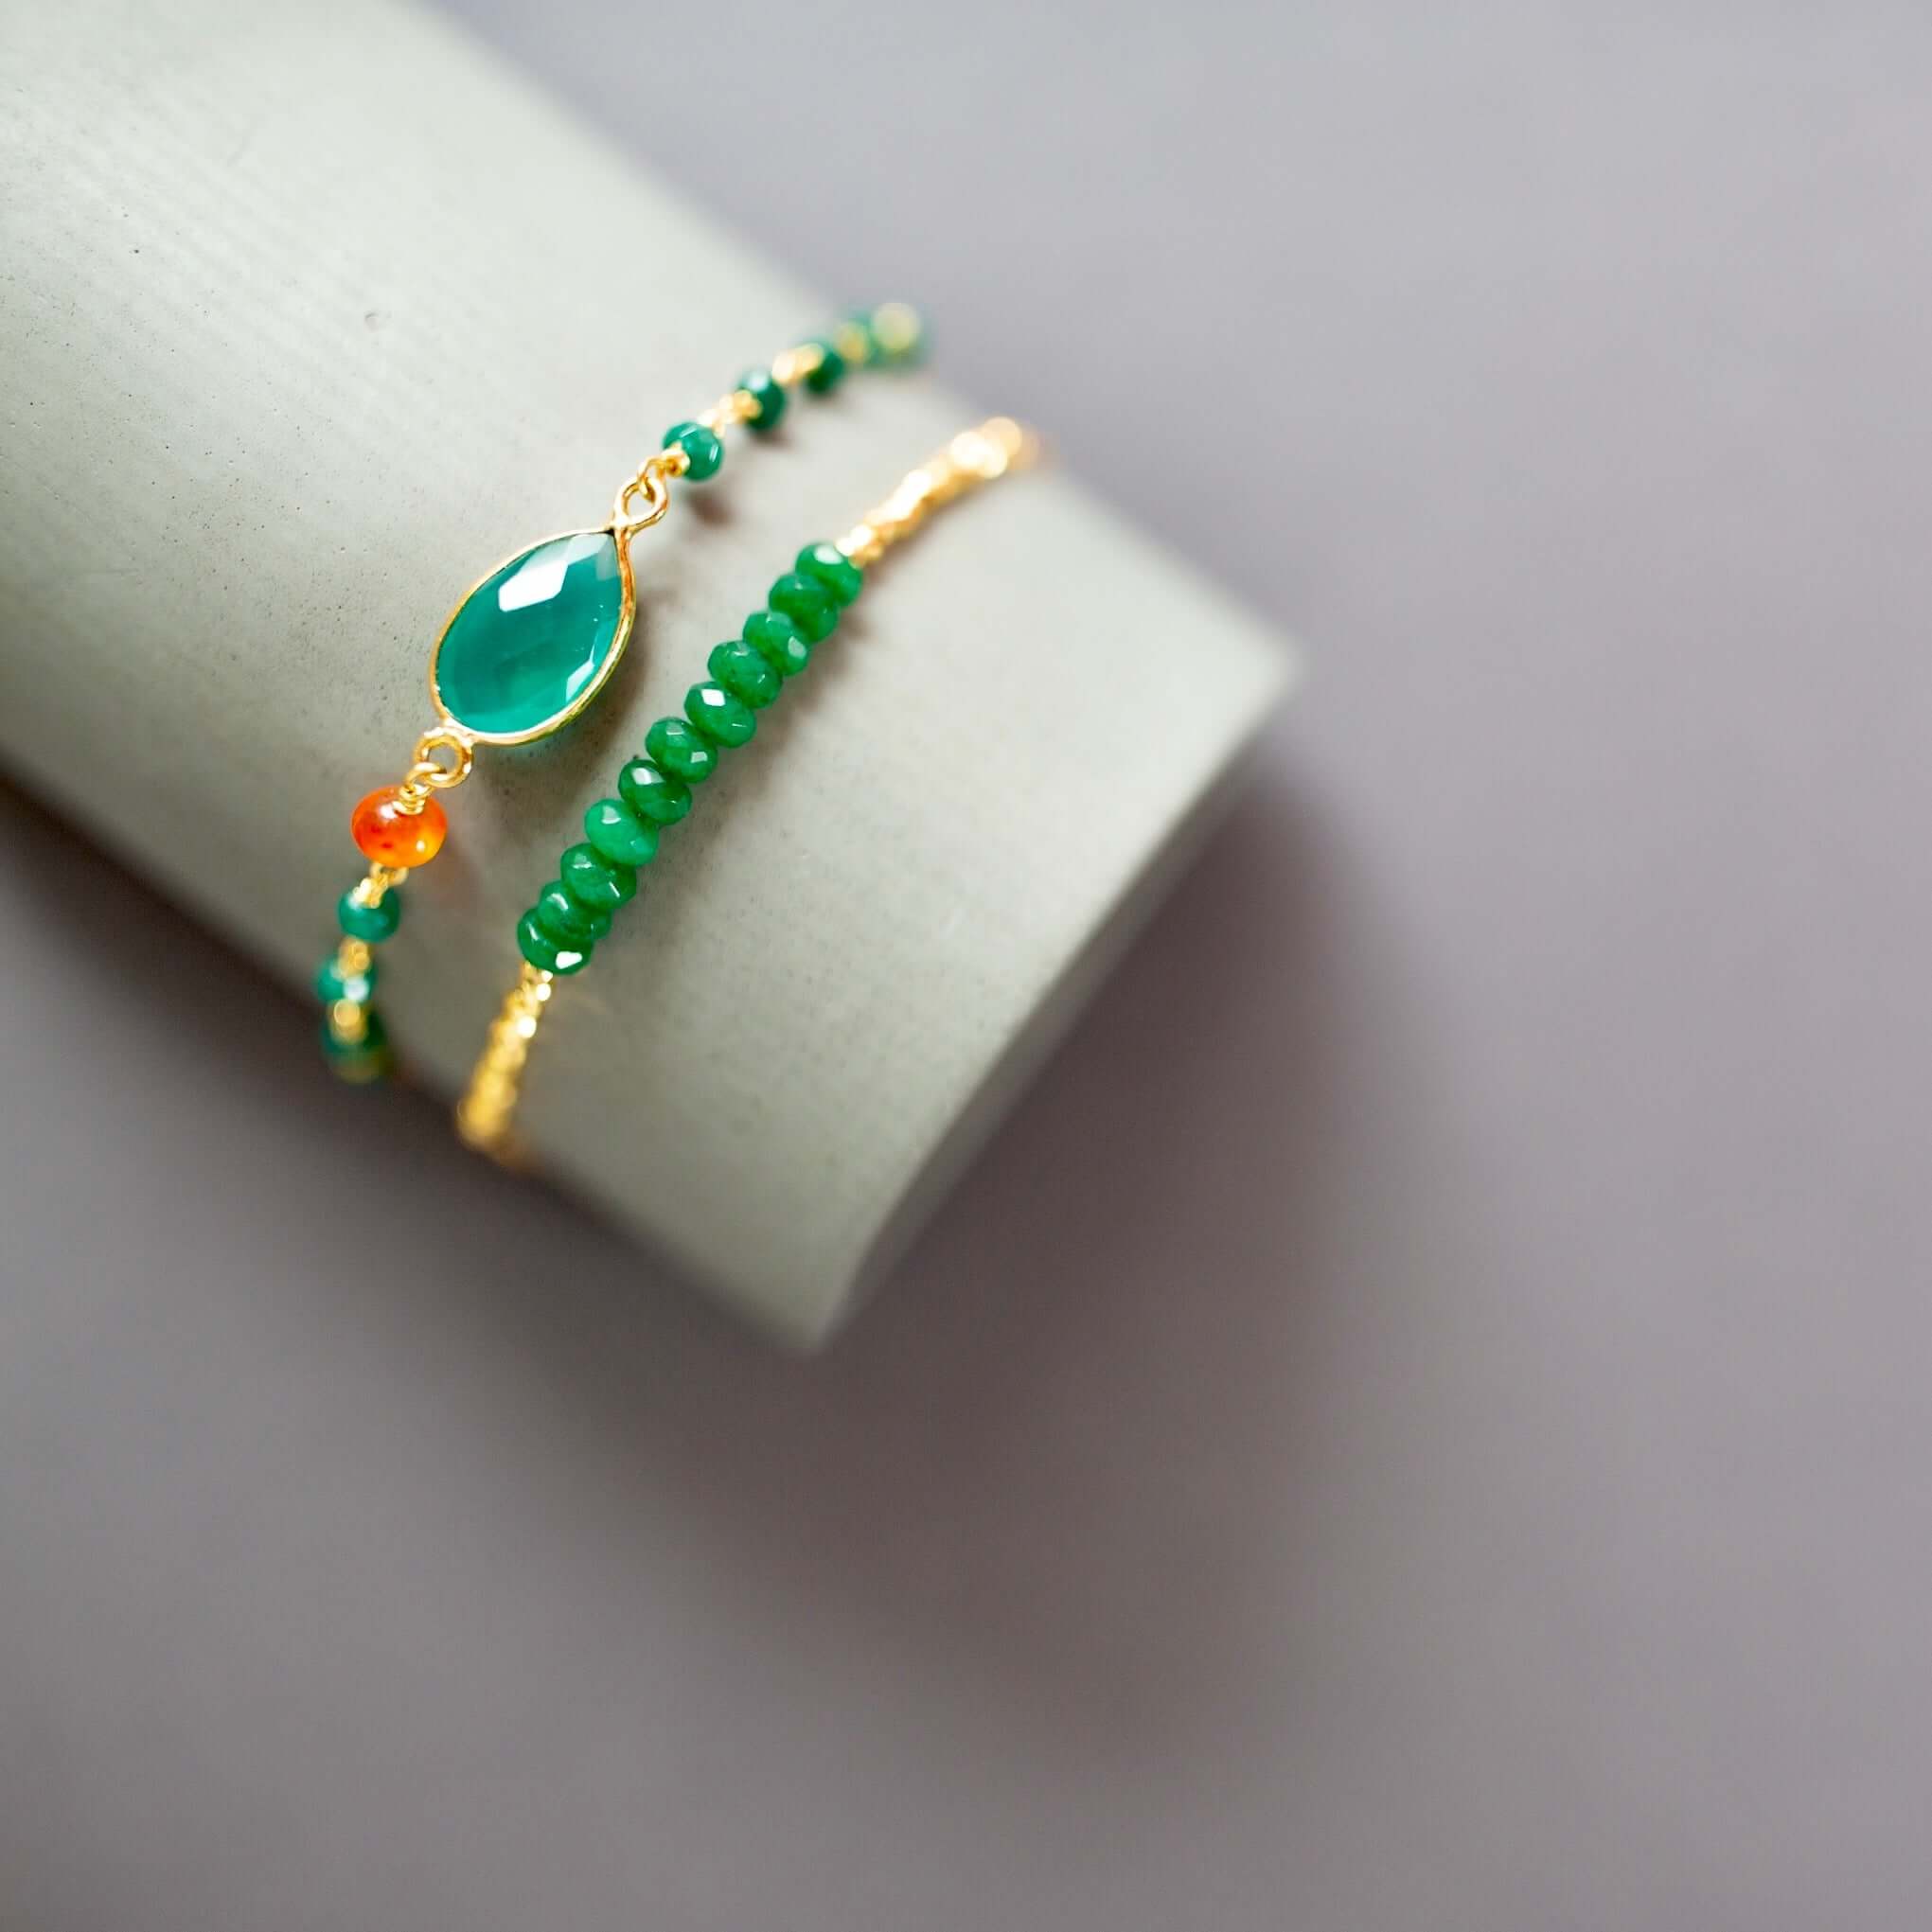 Gold-Plated Chain Bracelets Adorned with Authentic Green Jade Stones